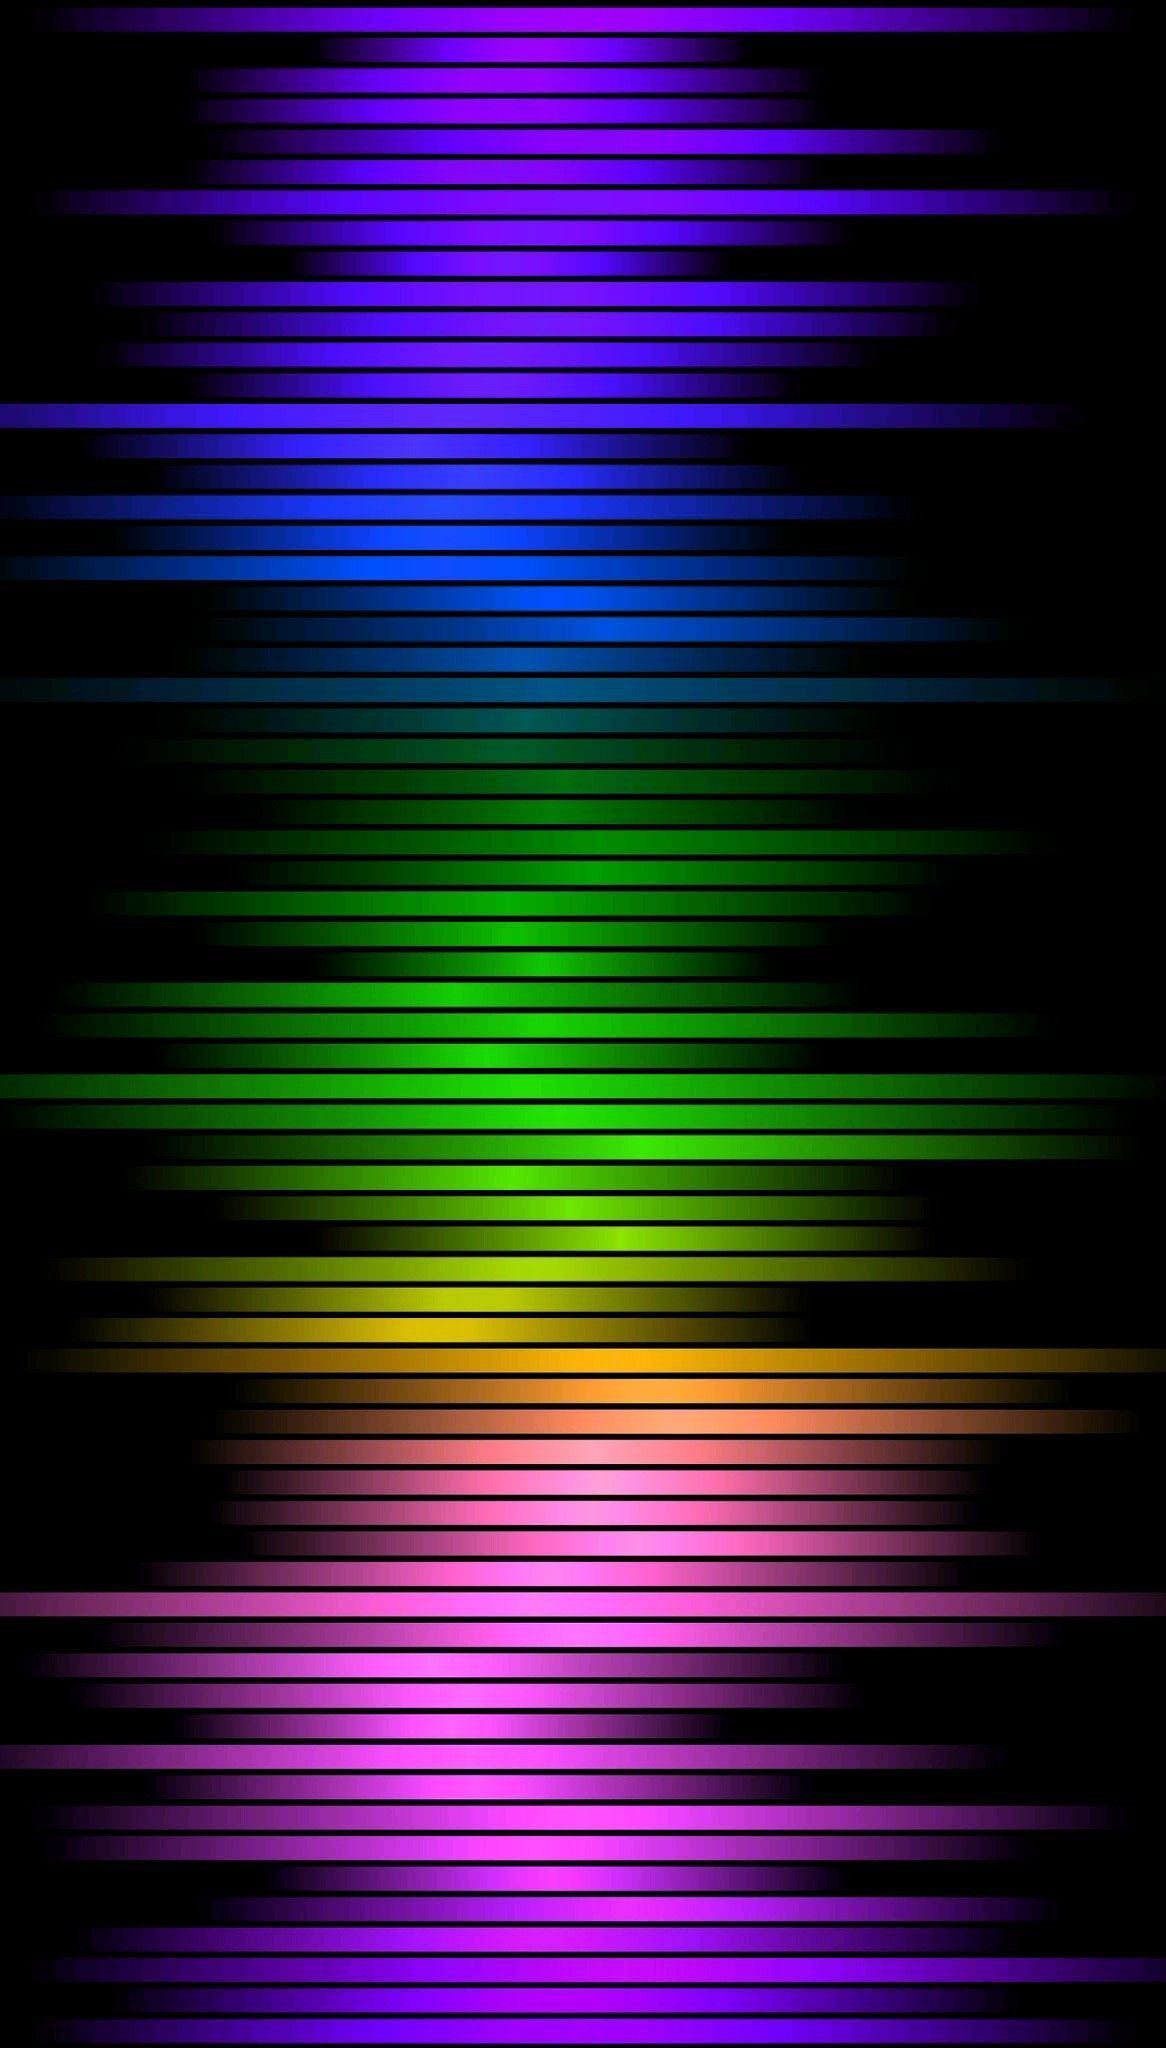 Colourful LED Equalizer Disco Lights 2 Background Lockscreen. Cool Background Wallpaper, Rainbow Wallpaper, Unique Wallpaper